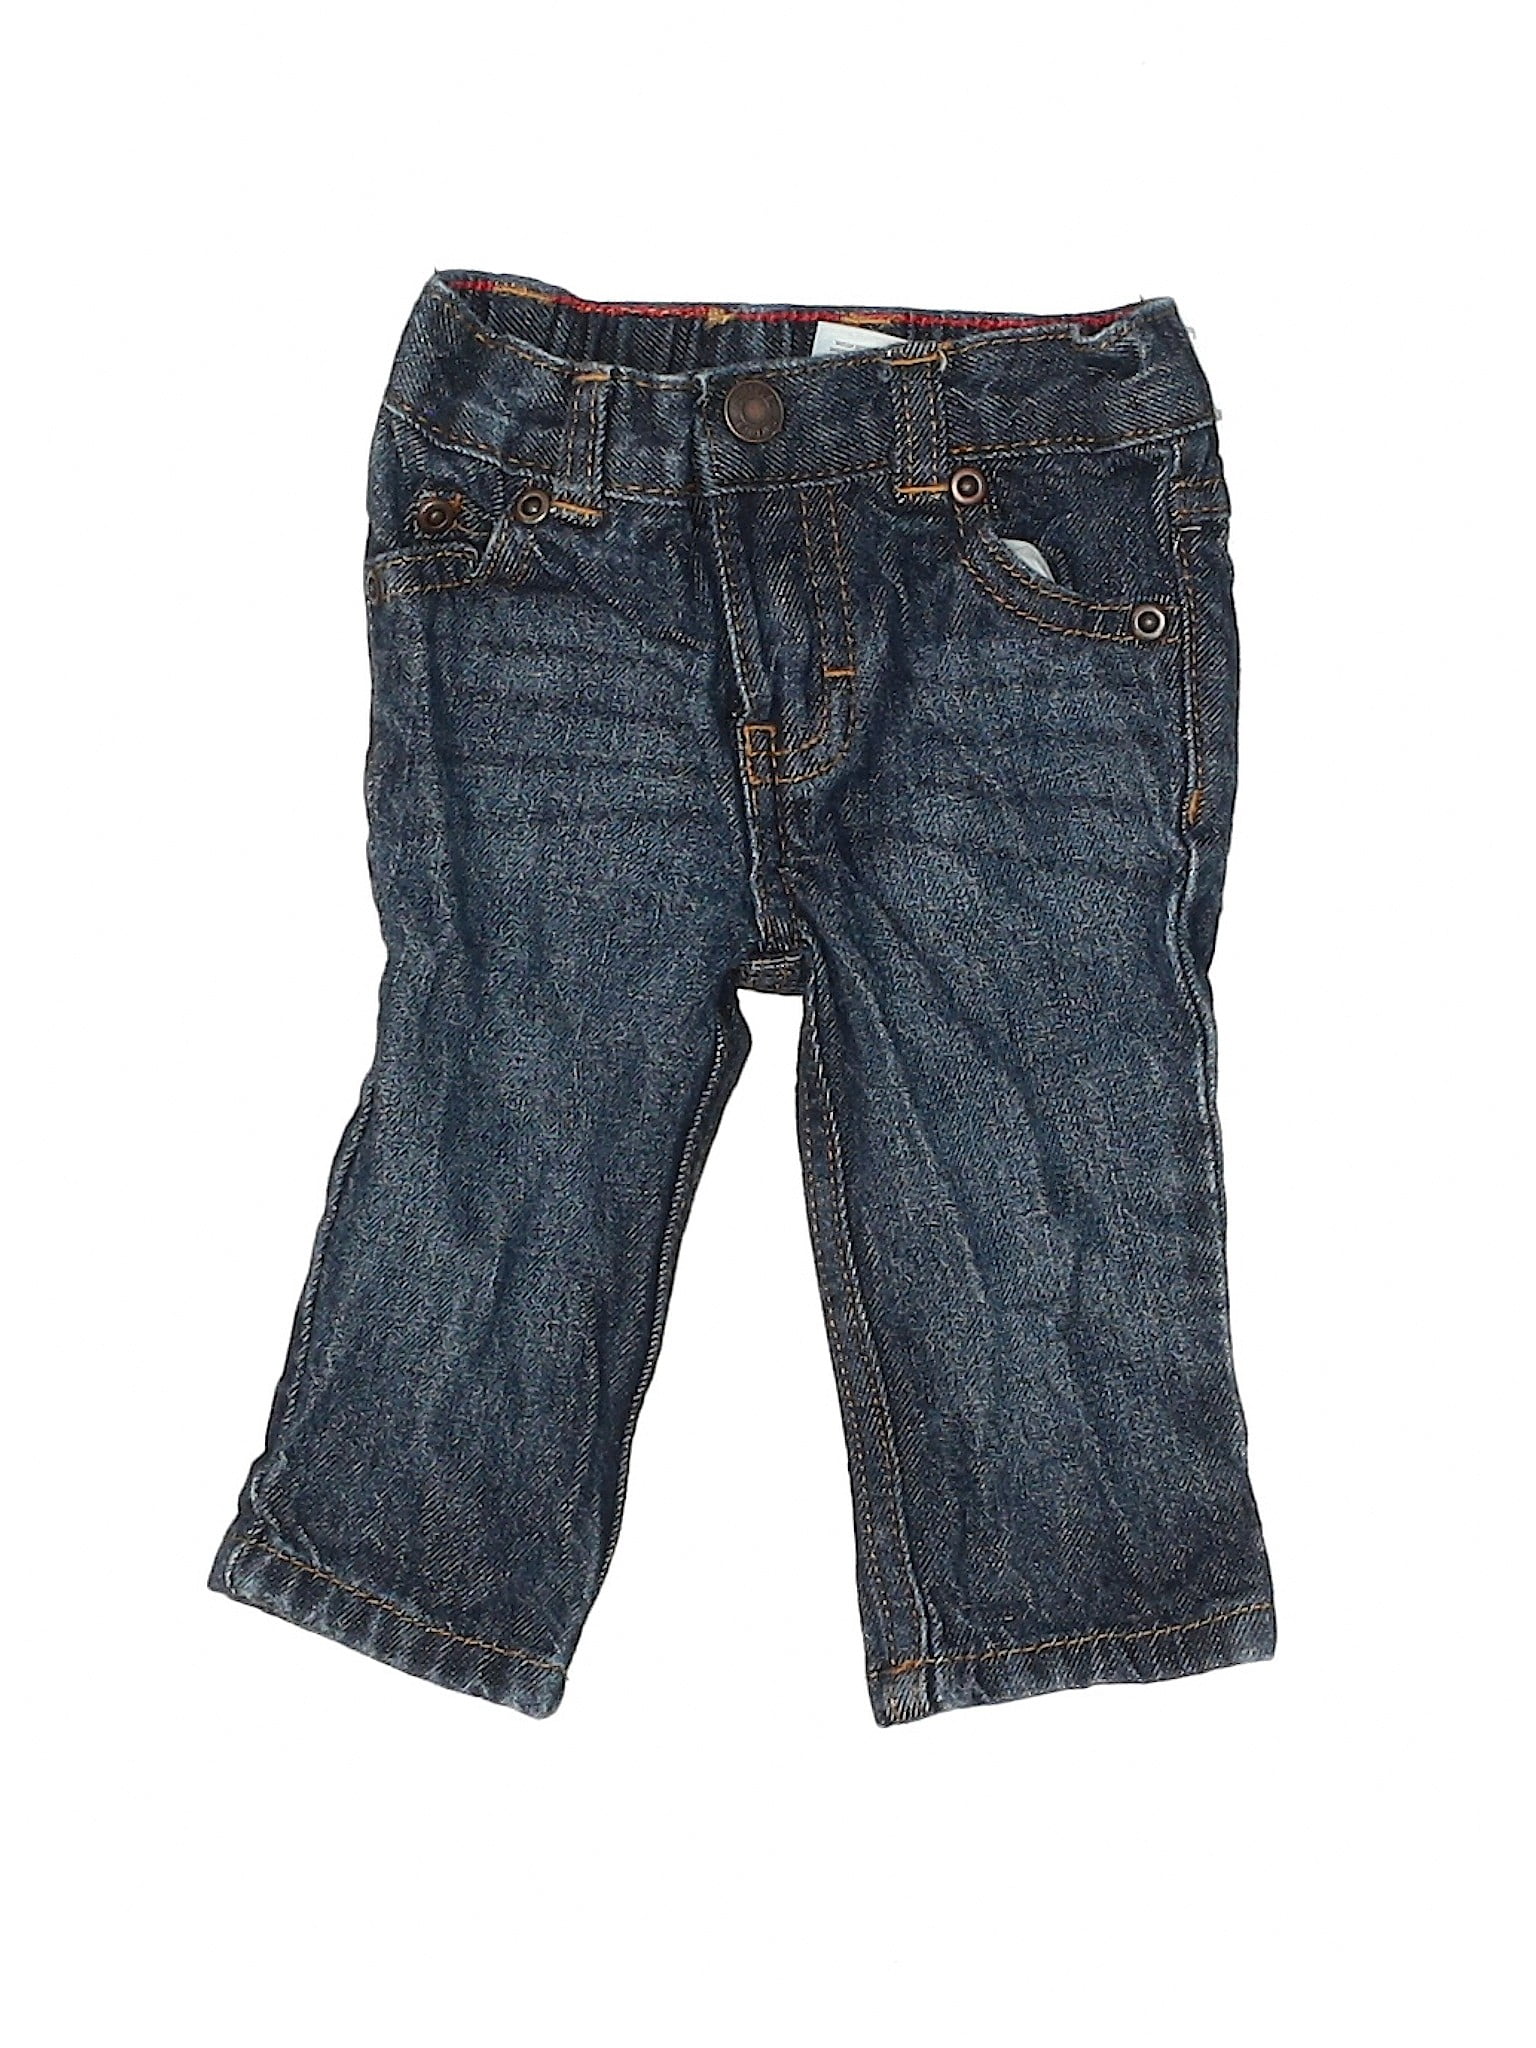 Carter's - Pre-Owned Carter's Girl's Size 3 Mo Jeans - Walmart.com ...